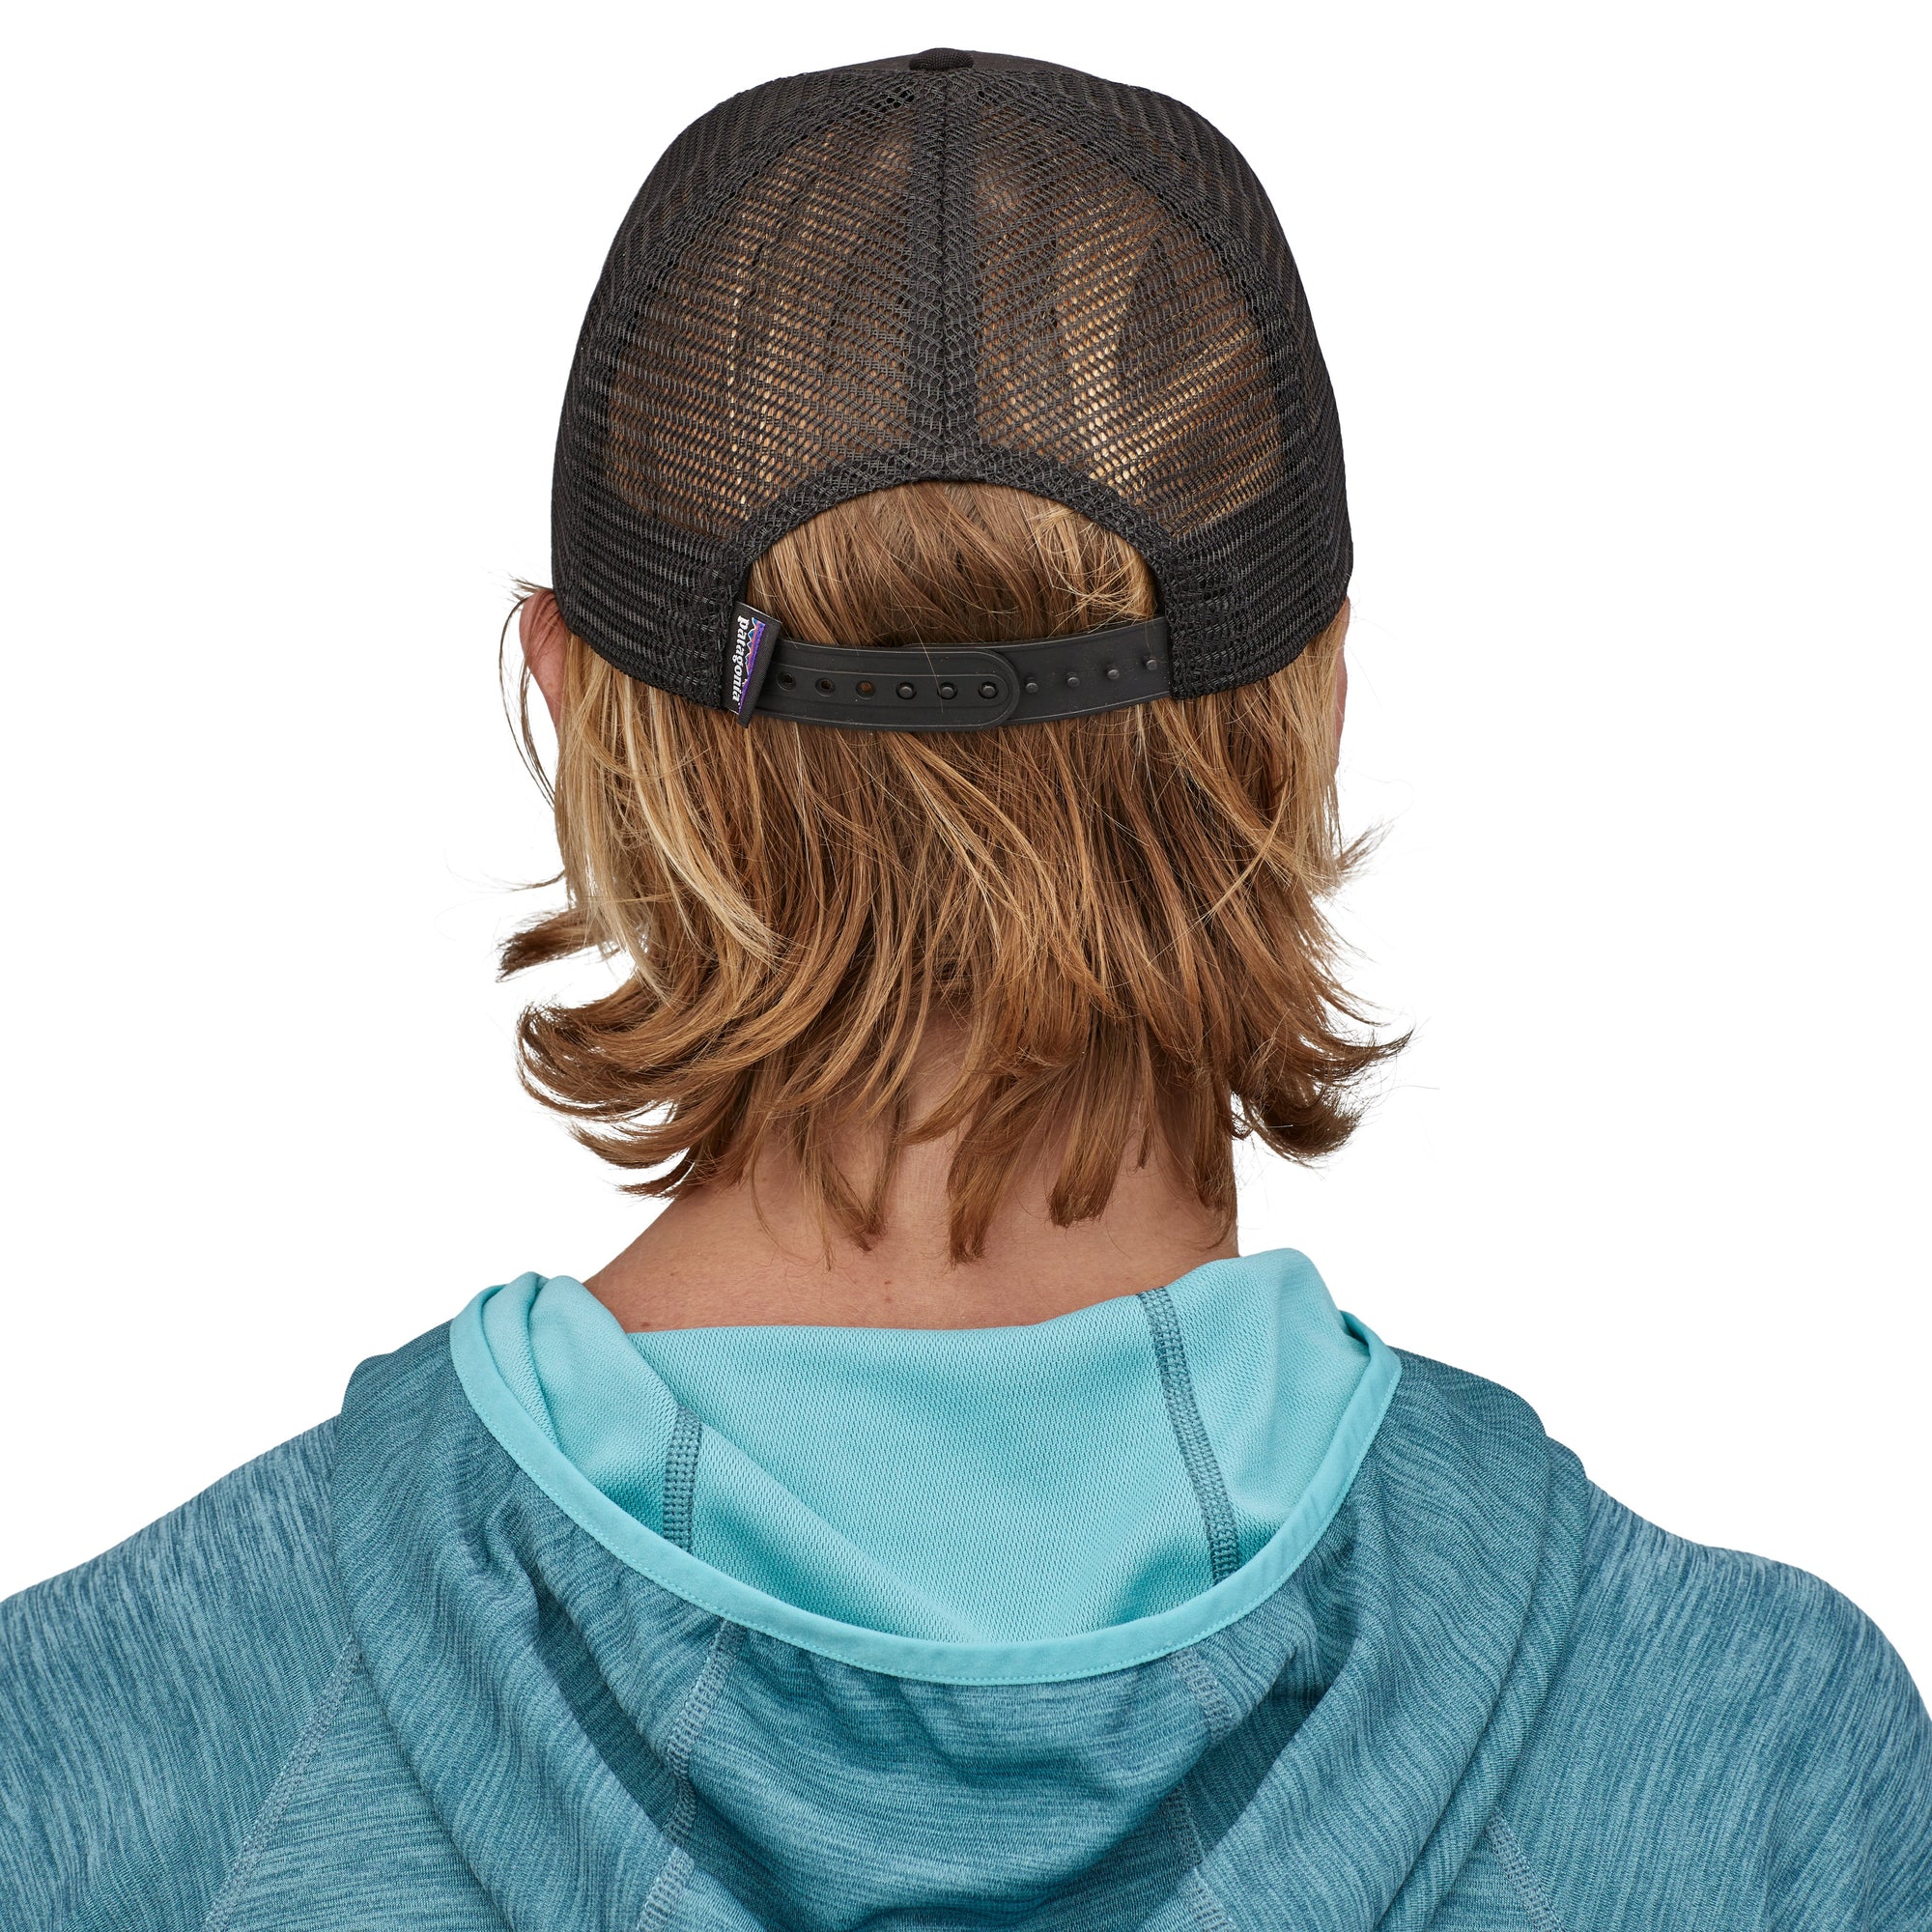 Patagonia Fitz Roy Trout Trucker Hat - Black - Iron Bow Fly Shop